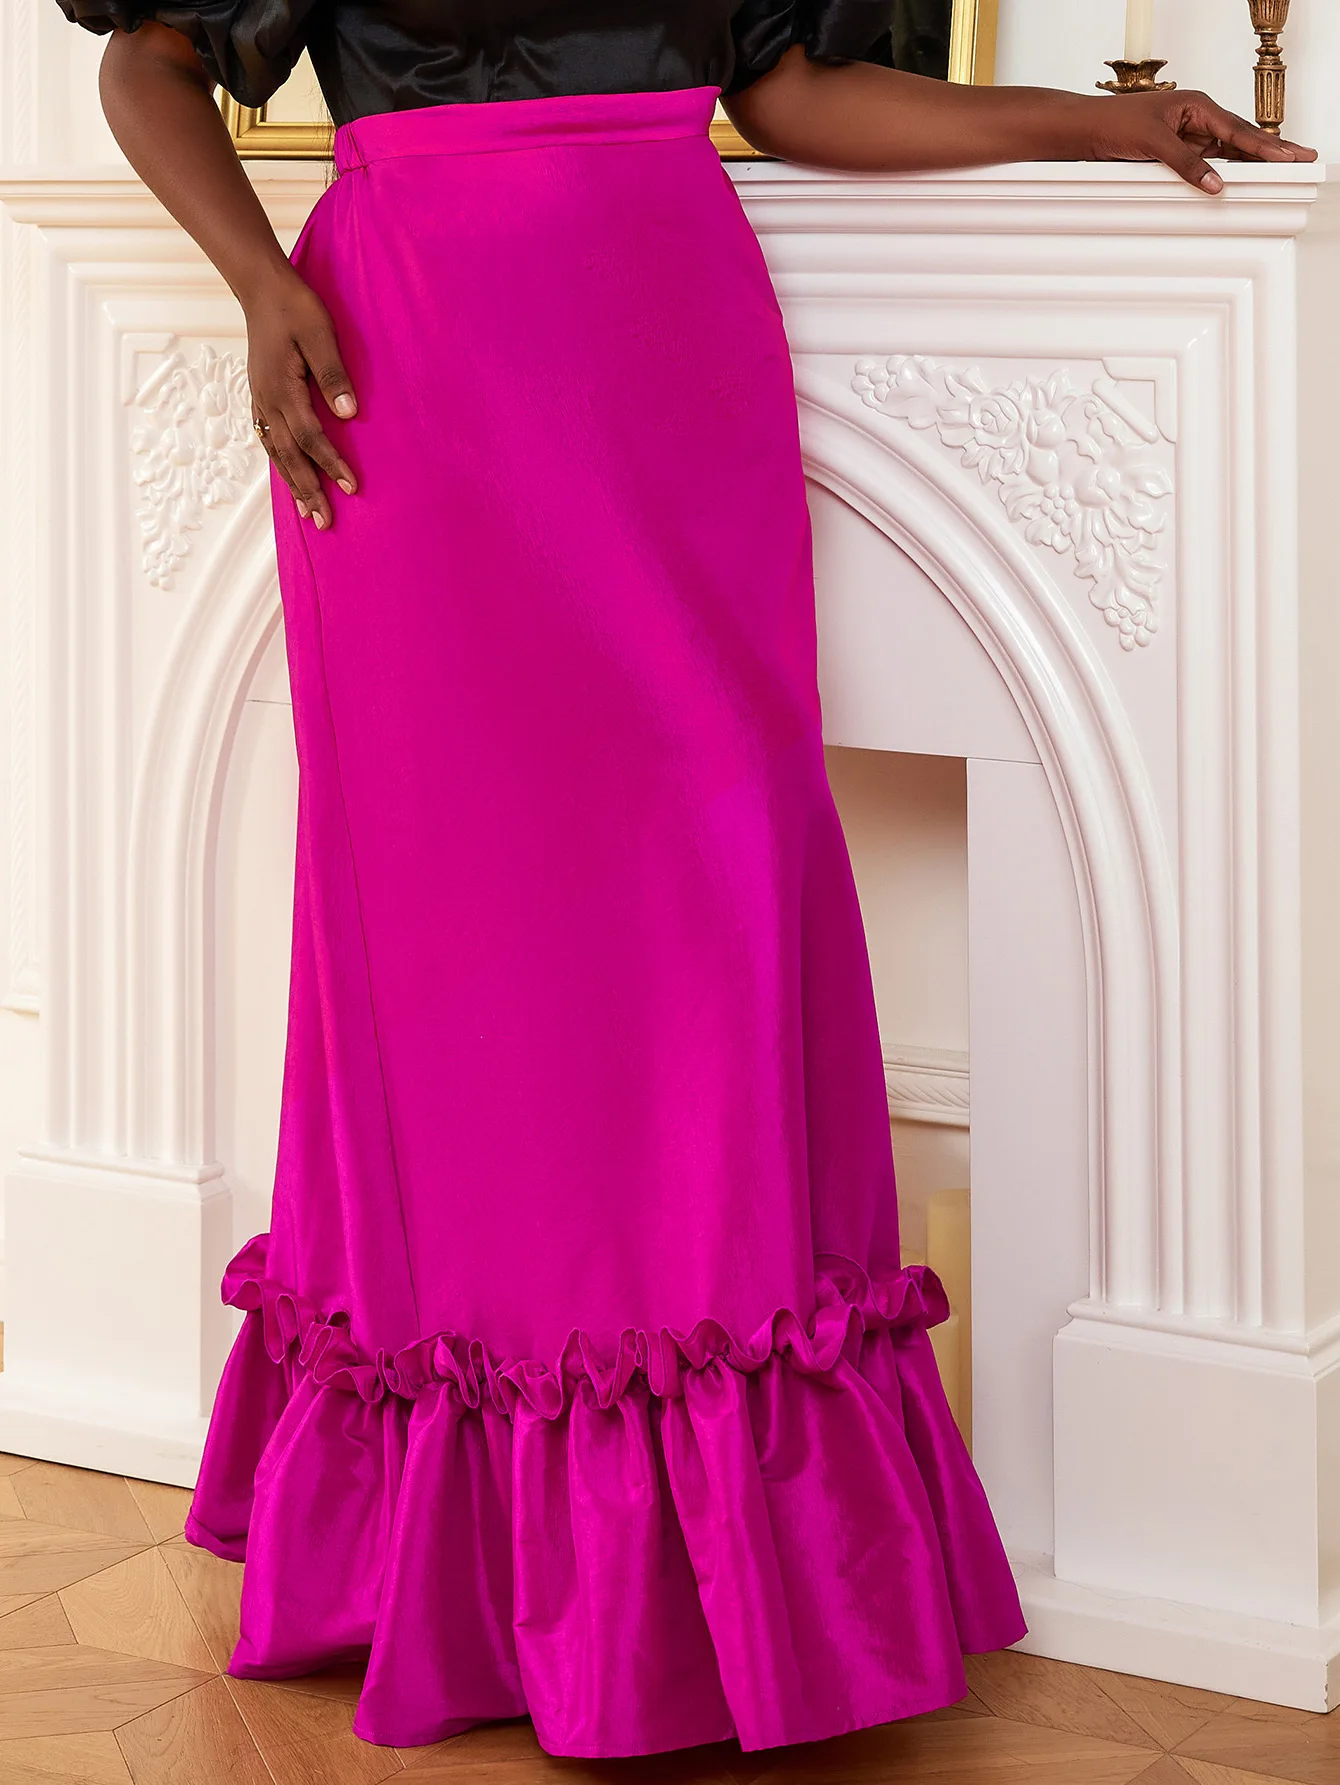 Fuchsia Long Skirts High Waist Shiny Loose Evening Party Cocktail Large Size Ruffles Floor Length Skirt for Ladies 3XL 4XL 2024 green pantsuits for women plus size for business custom made for free ladies pantsuit blazer pants for work wedding party